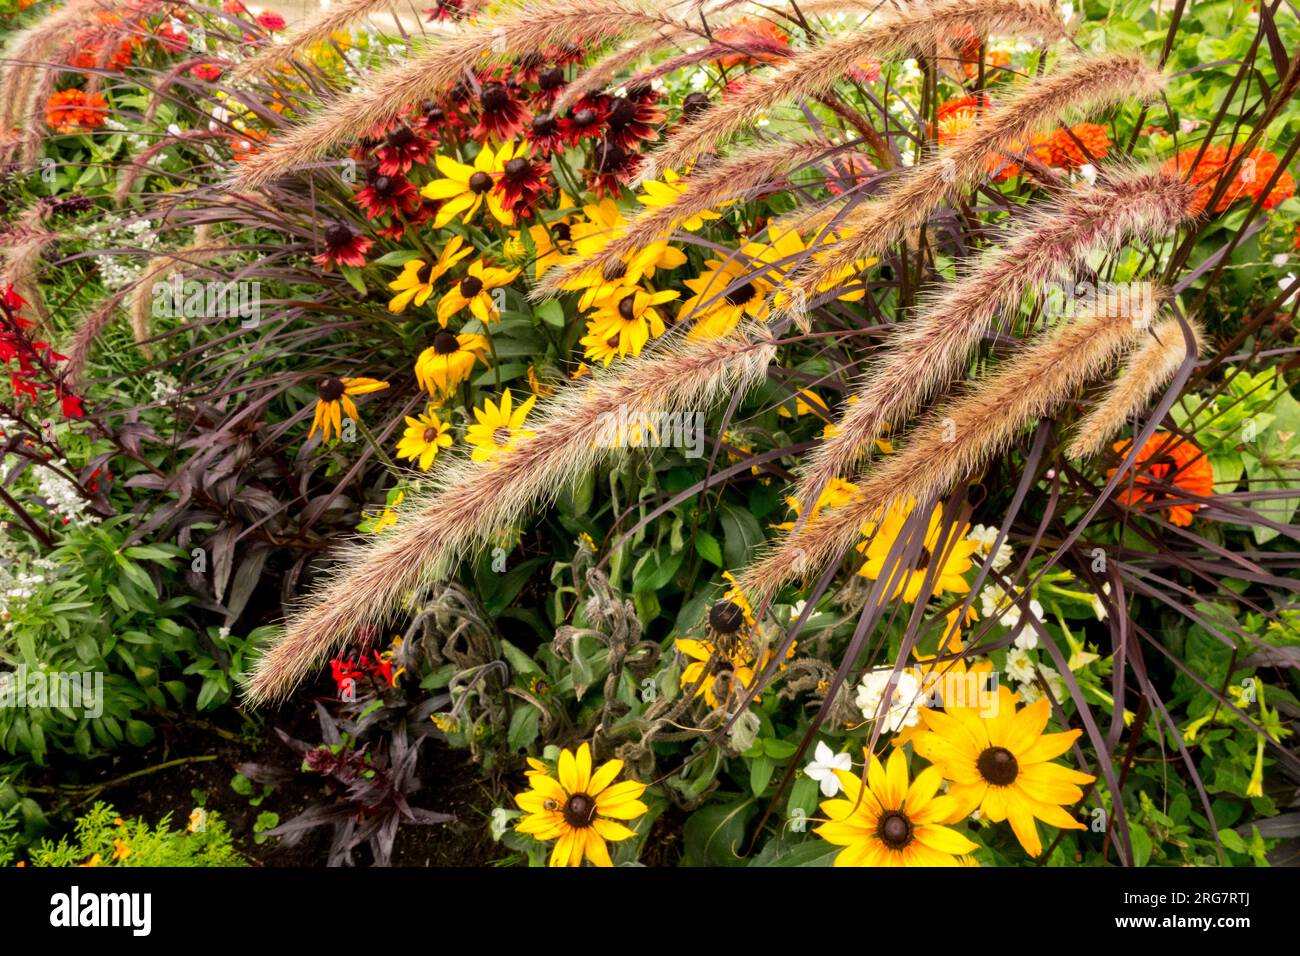 Mixed, Mid summer, plants, Feathertop Fountain Grass, Pennisetum alopecuroides, Herbaceous, Rudbeckias, Colourful, Blooming, Border, Bed Stock Photo